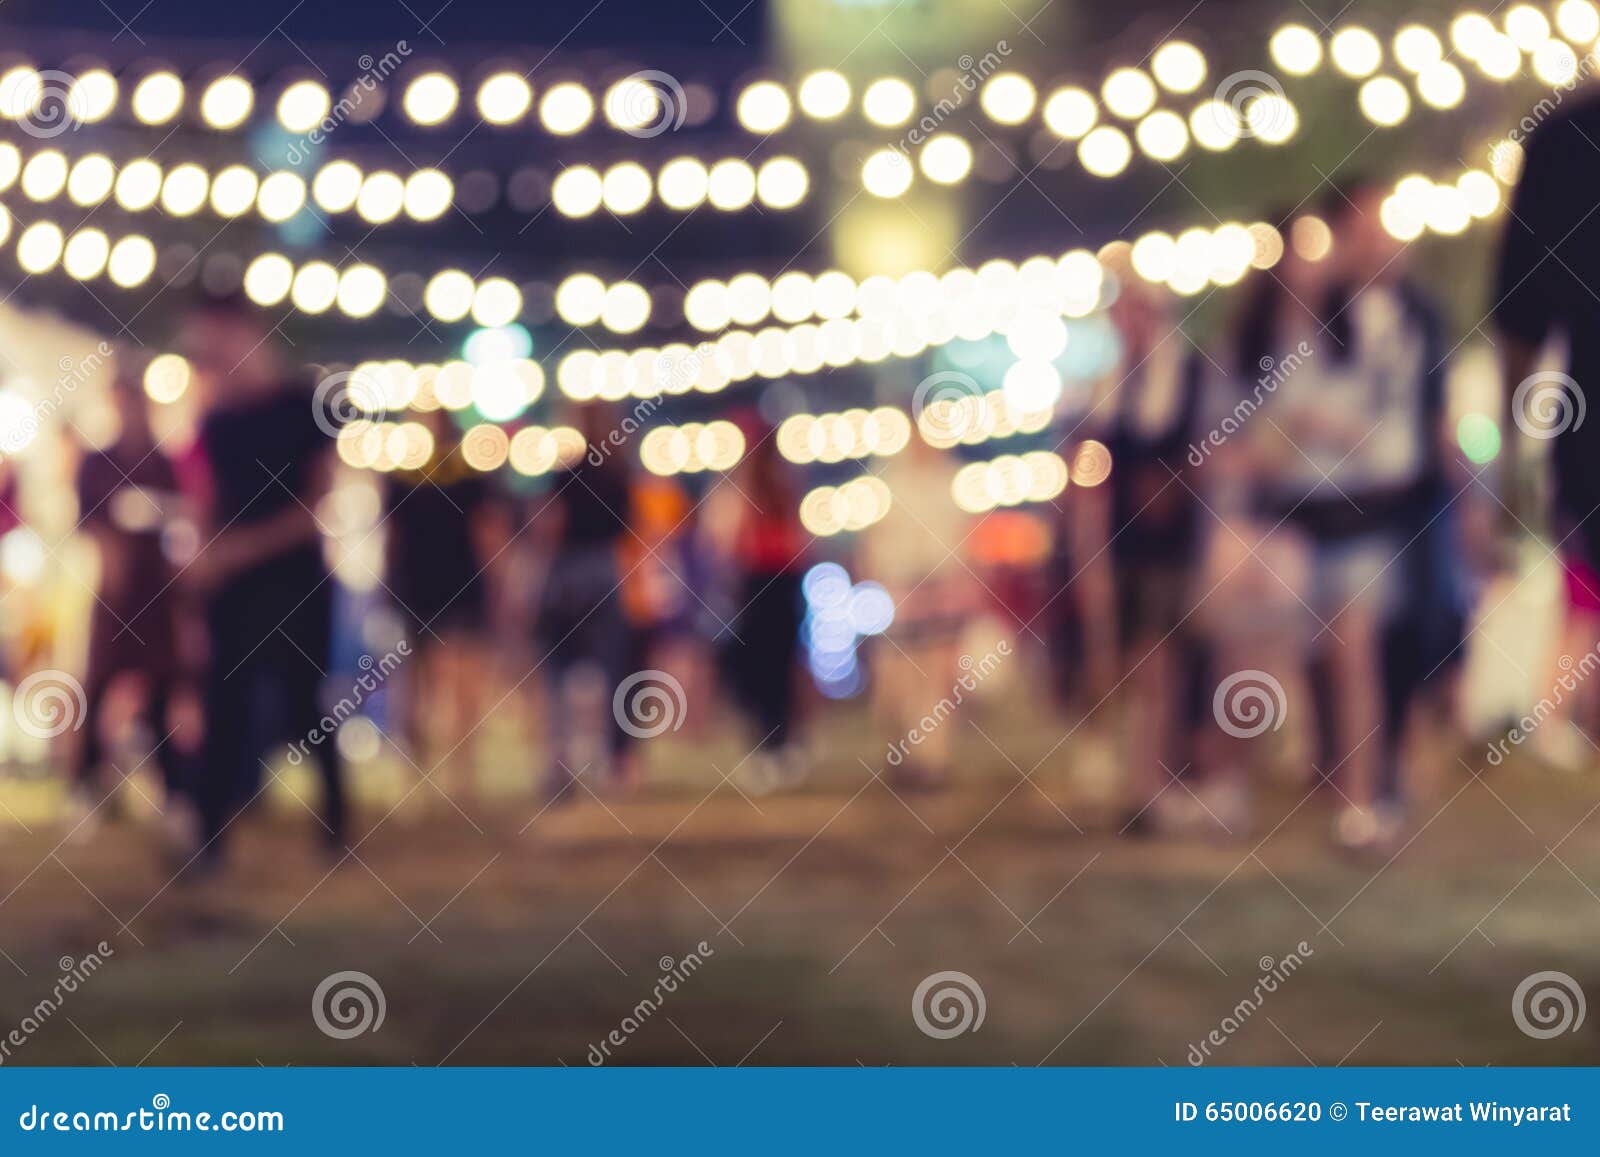 festival event party with people blurred background